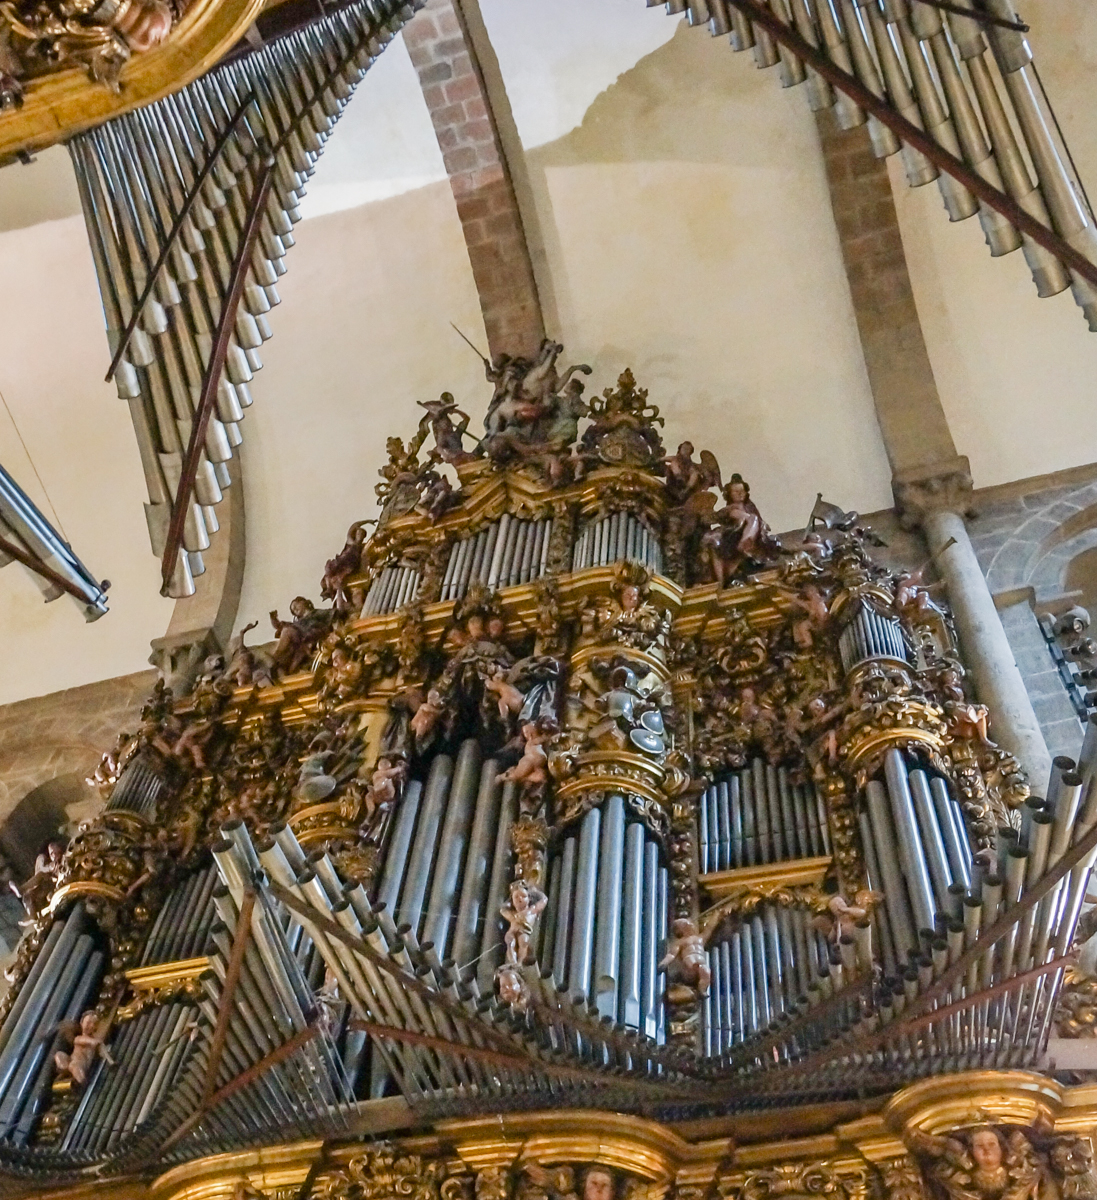 Pipes of the organ in the Catedral de Santiago (Spain) | Photo by Mike Hudak